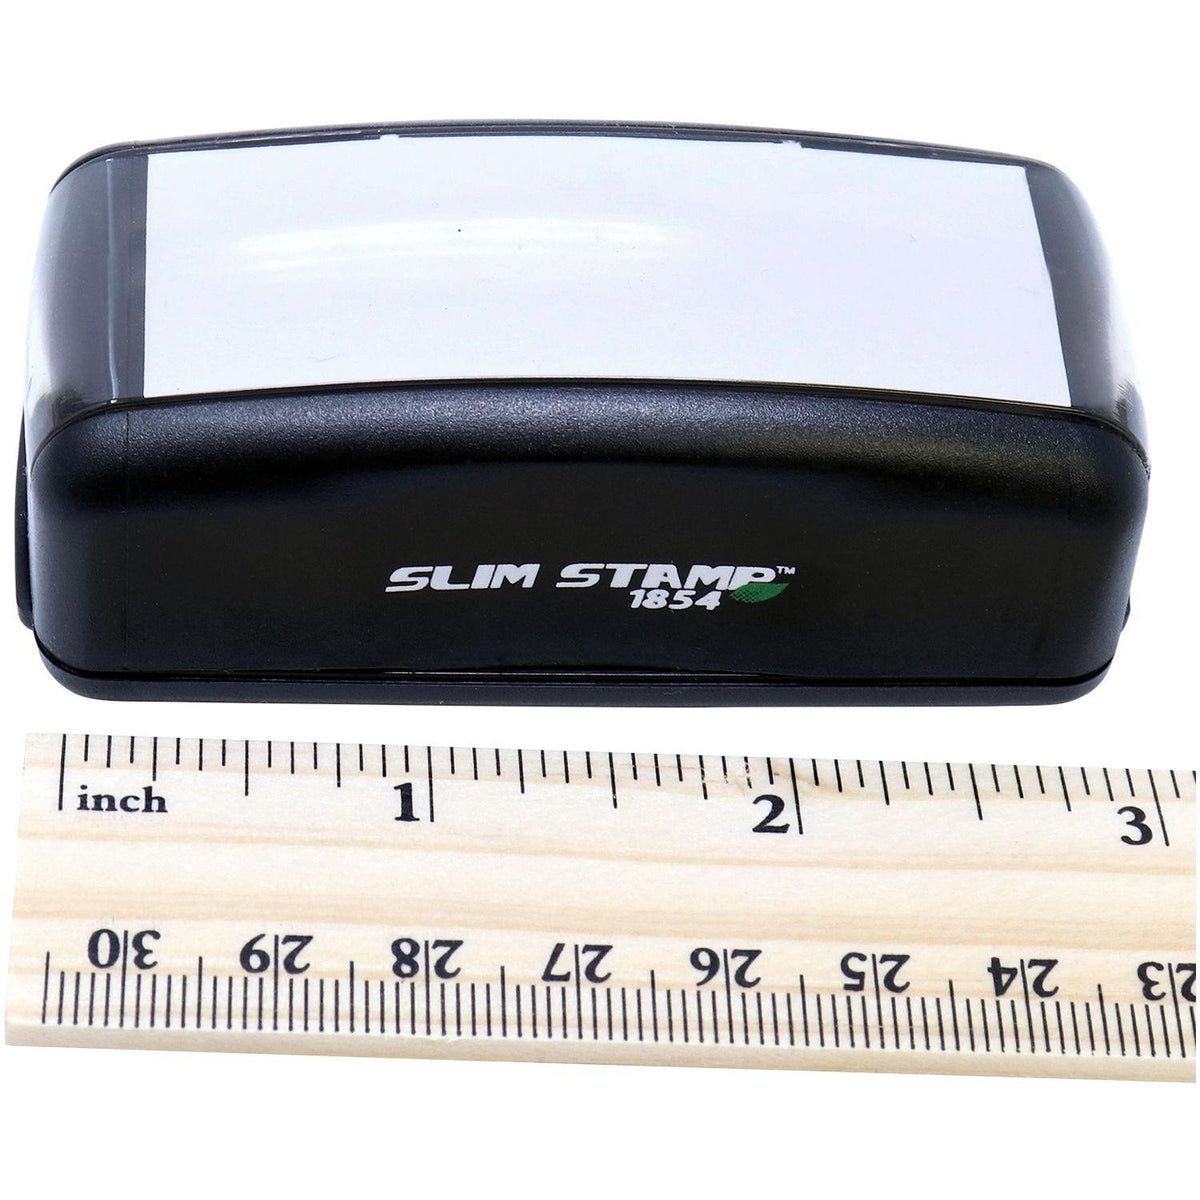 Measurement Large Pre-Inked Confirmation Stamp with Ruler